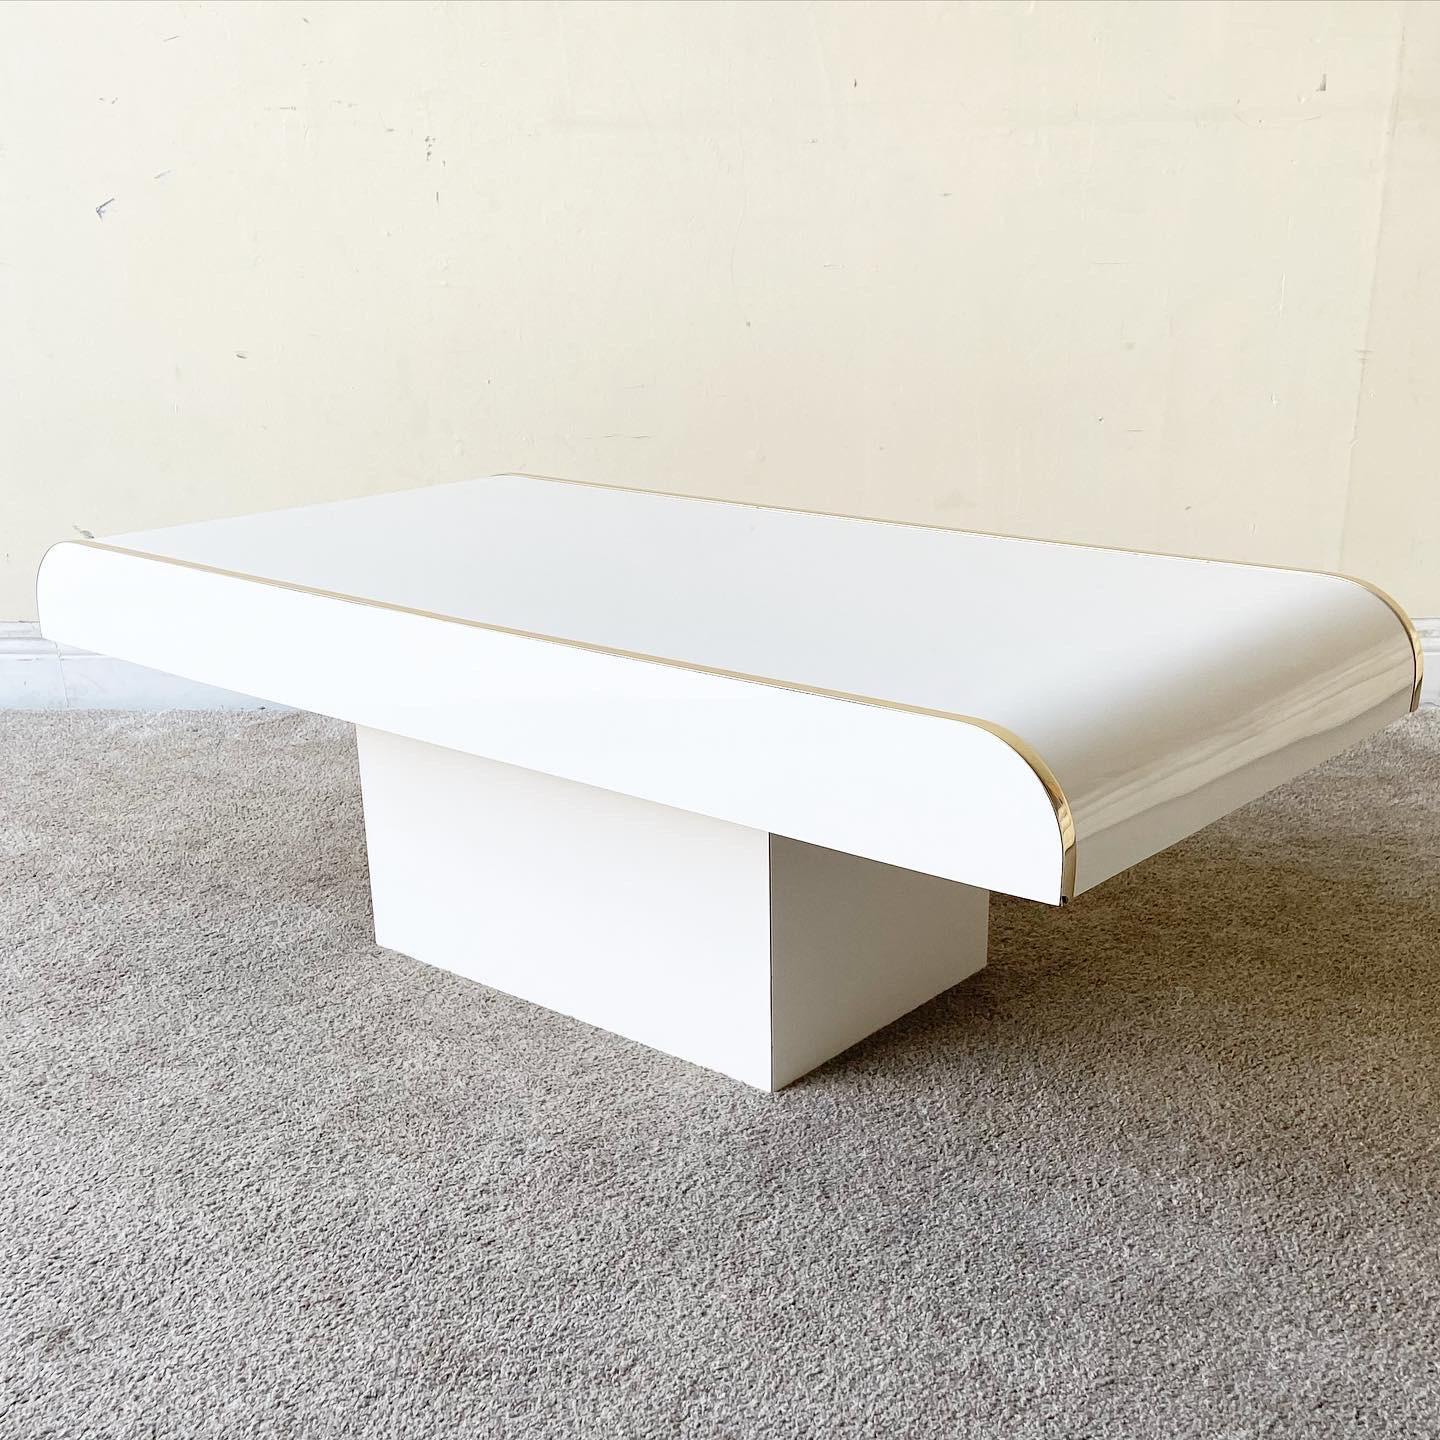 Incredible 1980s postmodern waterfall coffee table. Rectangular table features a white lacquer laminate with gold edges.

Additional Information:
Material: Laminate, Wood
Color: Gold, White
Style: Postmodern
Time Period: 1980s
Place of